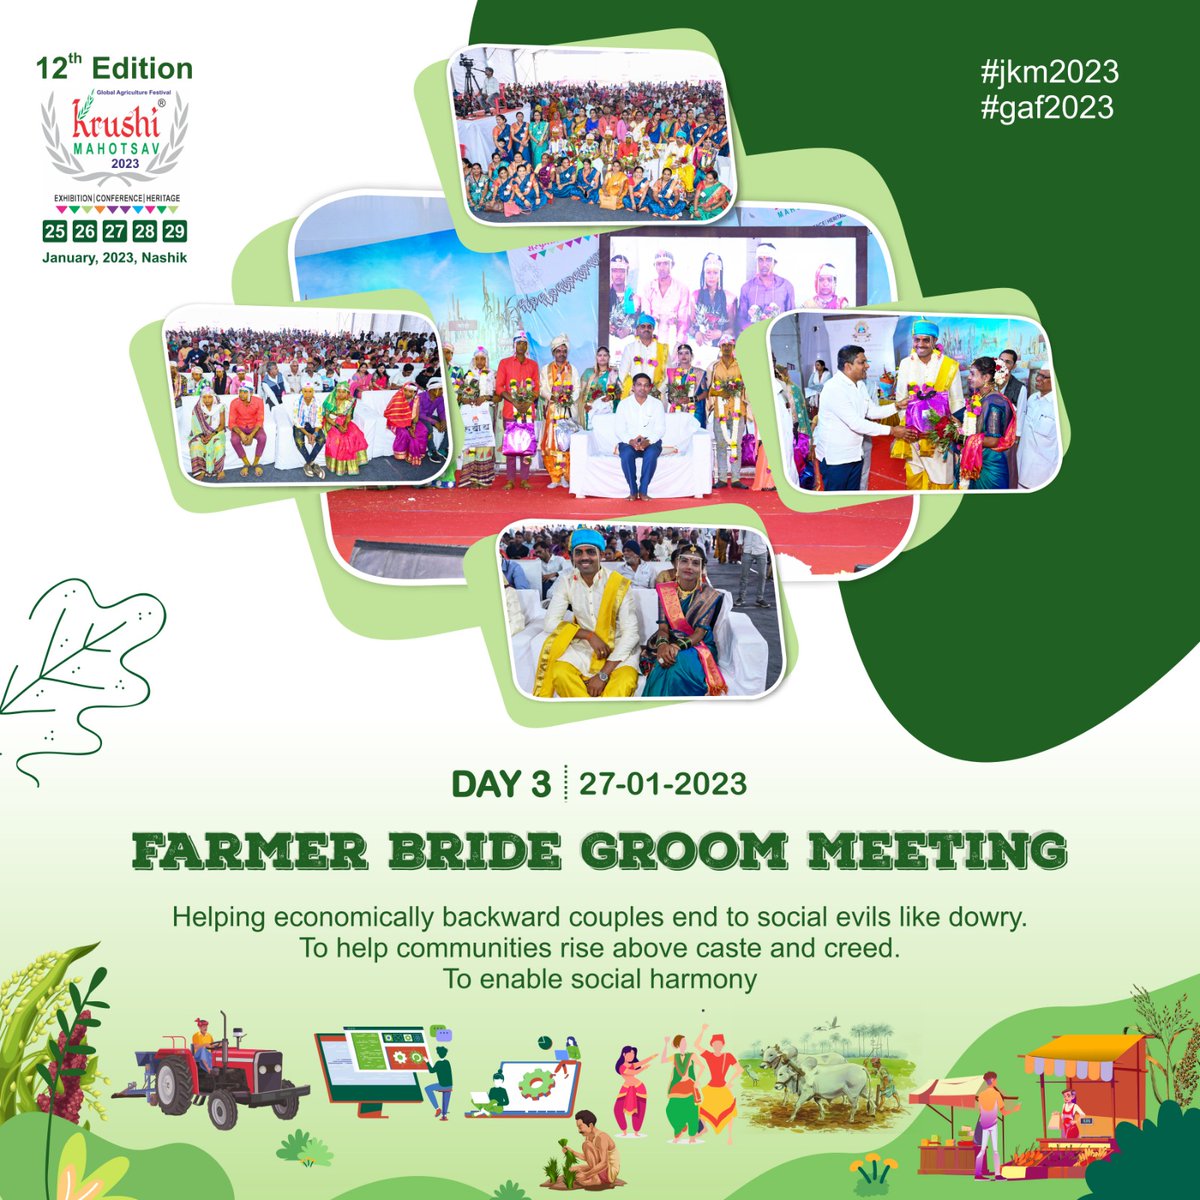 Former  Bride Groom Meeting 
Day 3

#JKM2023 #GAF2023 #12thEditionKrushiMahotsav #JagtikKrushiMahotsav2023 #KrushiMahotsav2023 #AgricultureFestival #AgricultureExhibition #FoodProcessingExhibition #WellnessExhibition #SustainableAgriculture #AgricultureEco #opportunity #culture